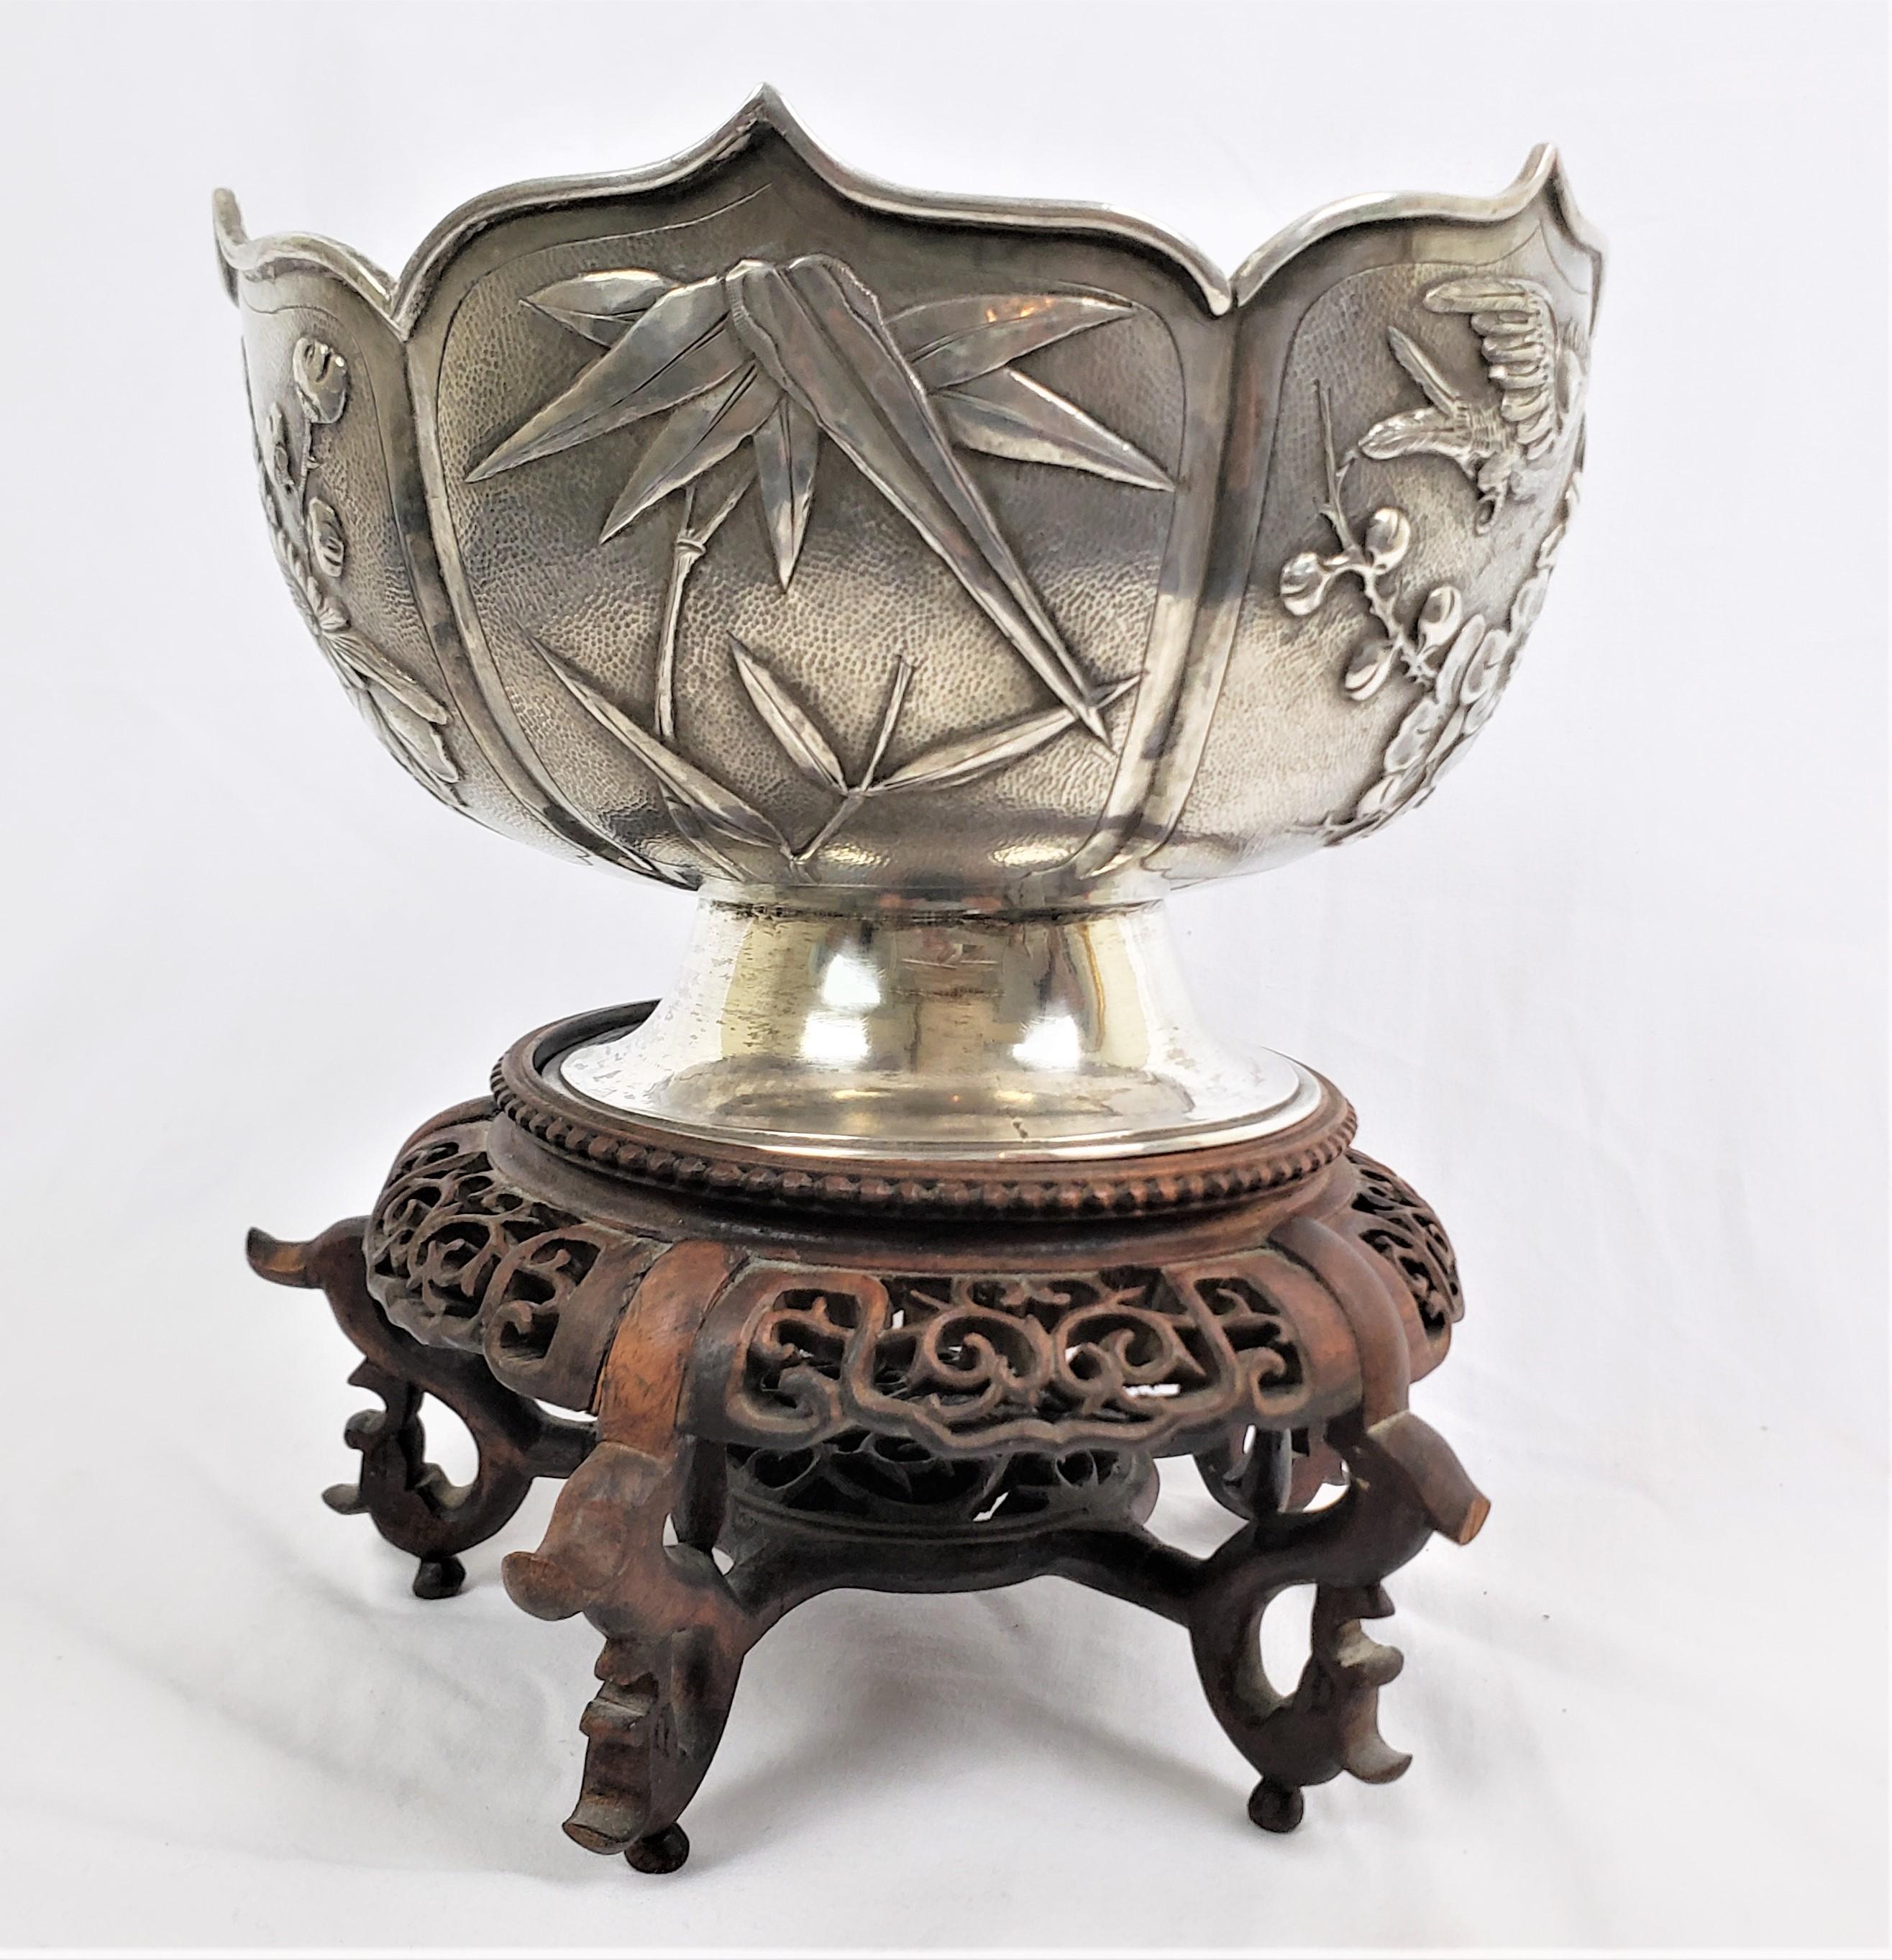 Zee Sung Signed Chinese Export Antique Chased Silver Presentation Bowl & Stand For Sale 2